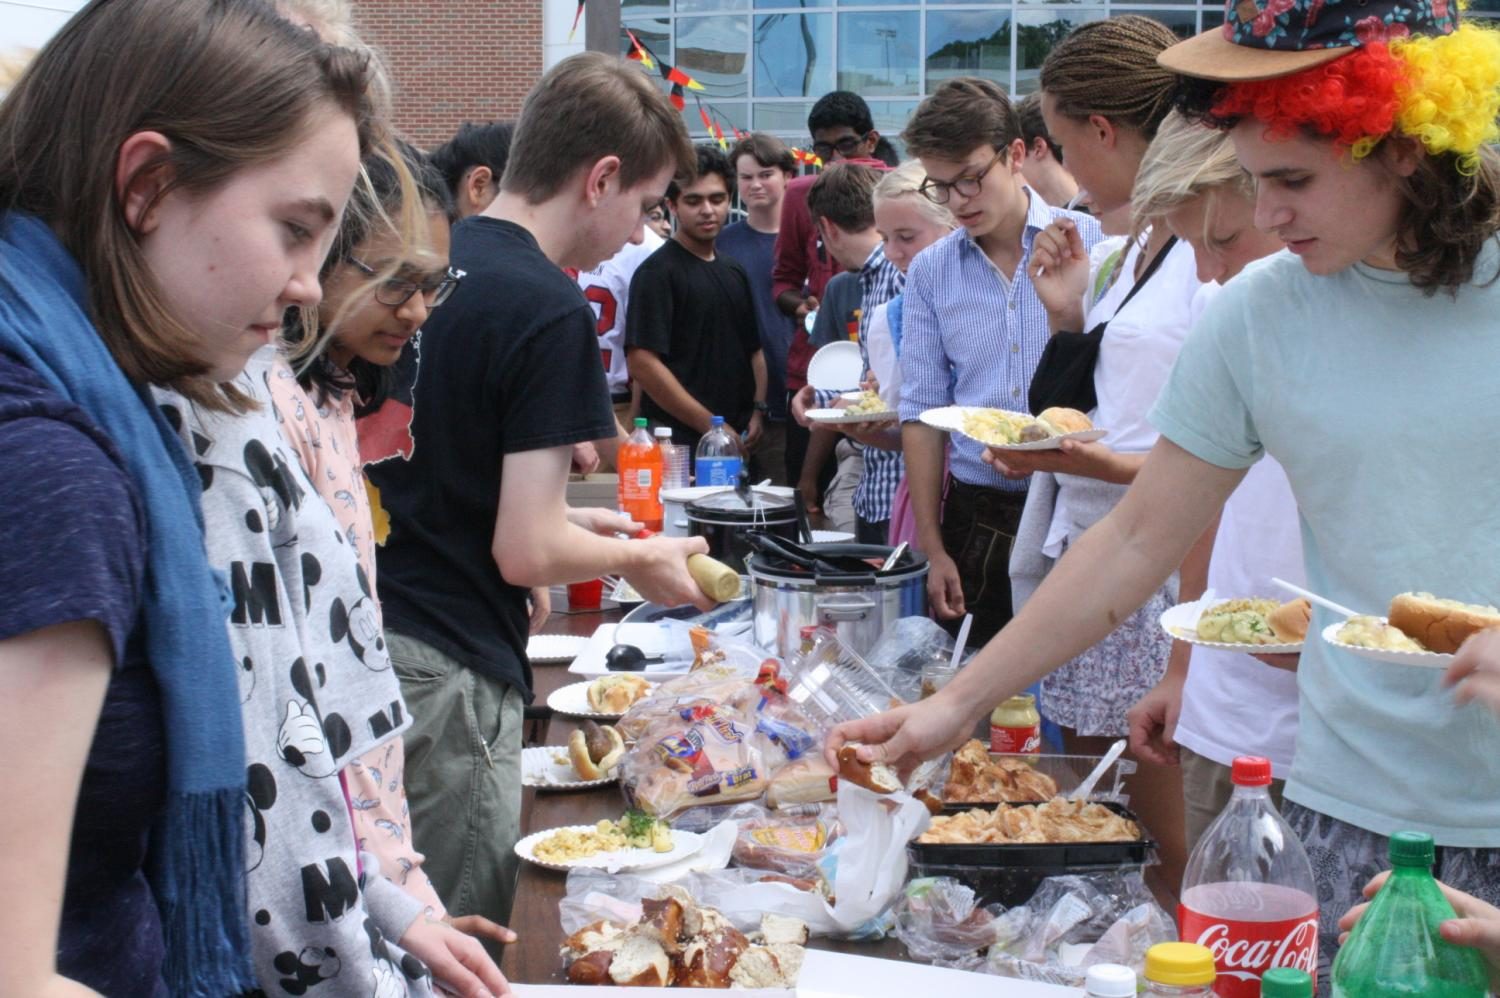 Jefferson students and their German exchange students set up in line for the Oktoberfest food, provided by the German Honor Society members.